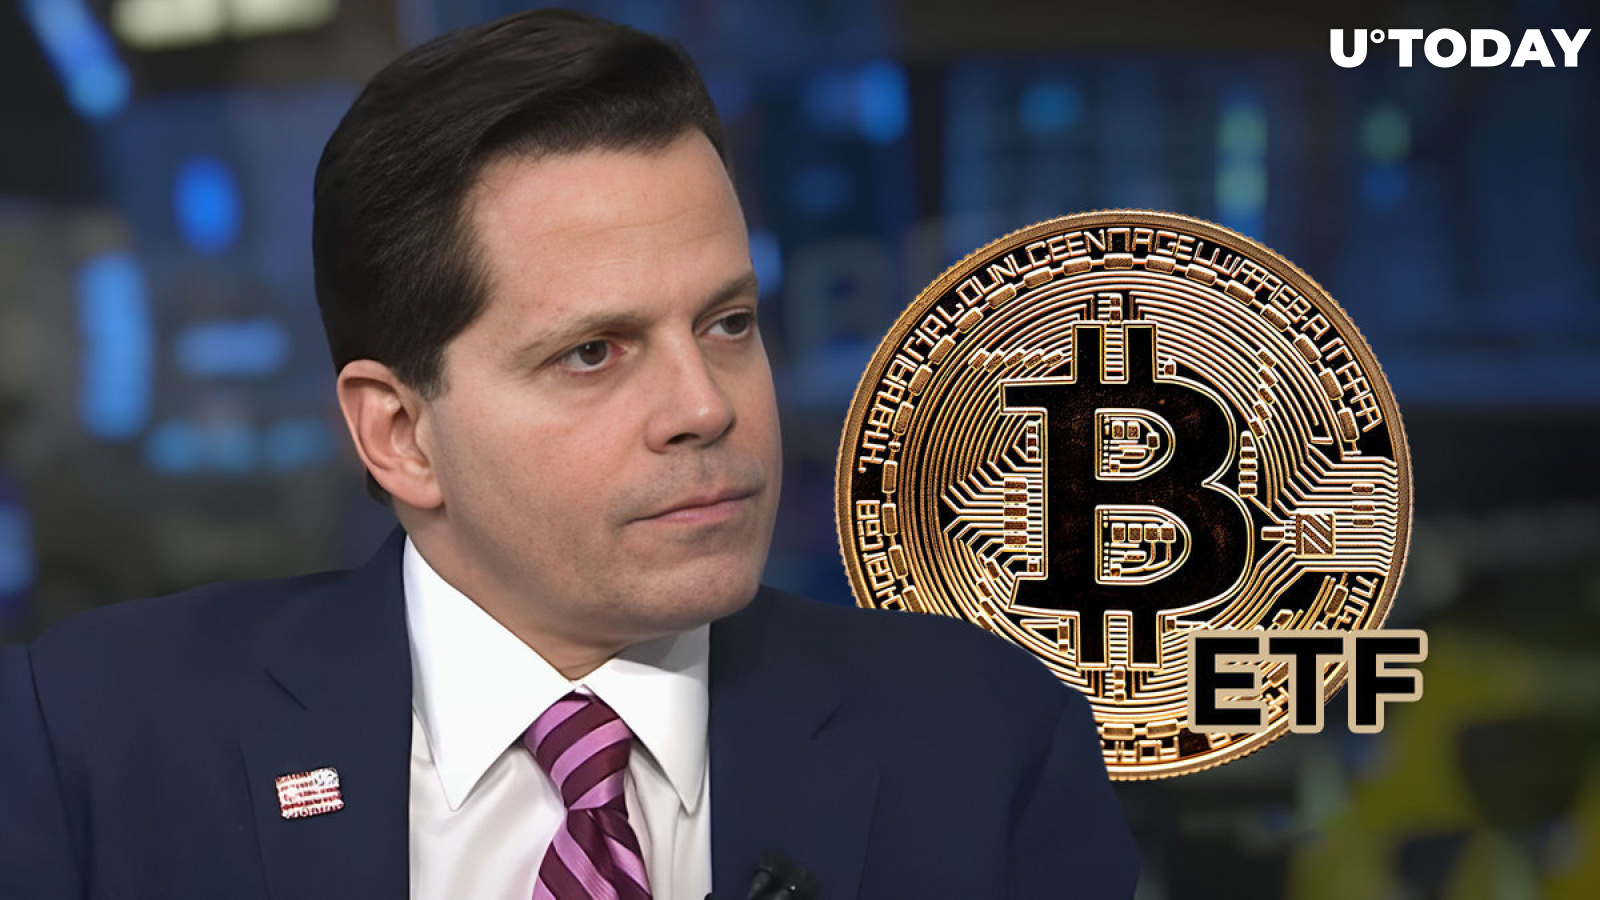 Ultra Optimistic Bitcoin ETF Post Published by SkyBridge Capital's Anthony Scaramucci